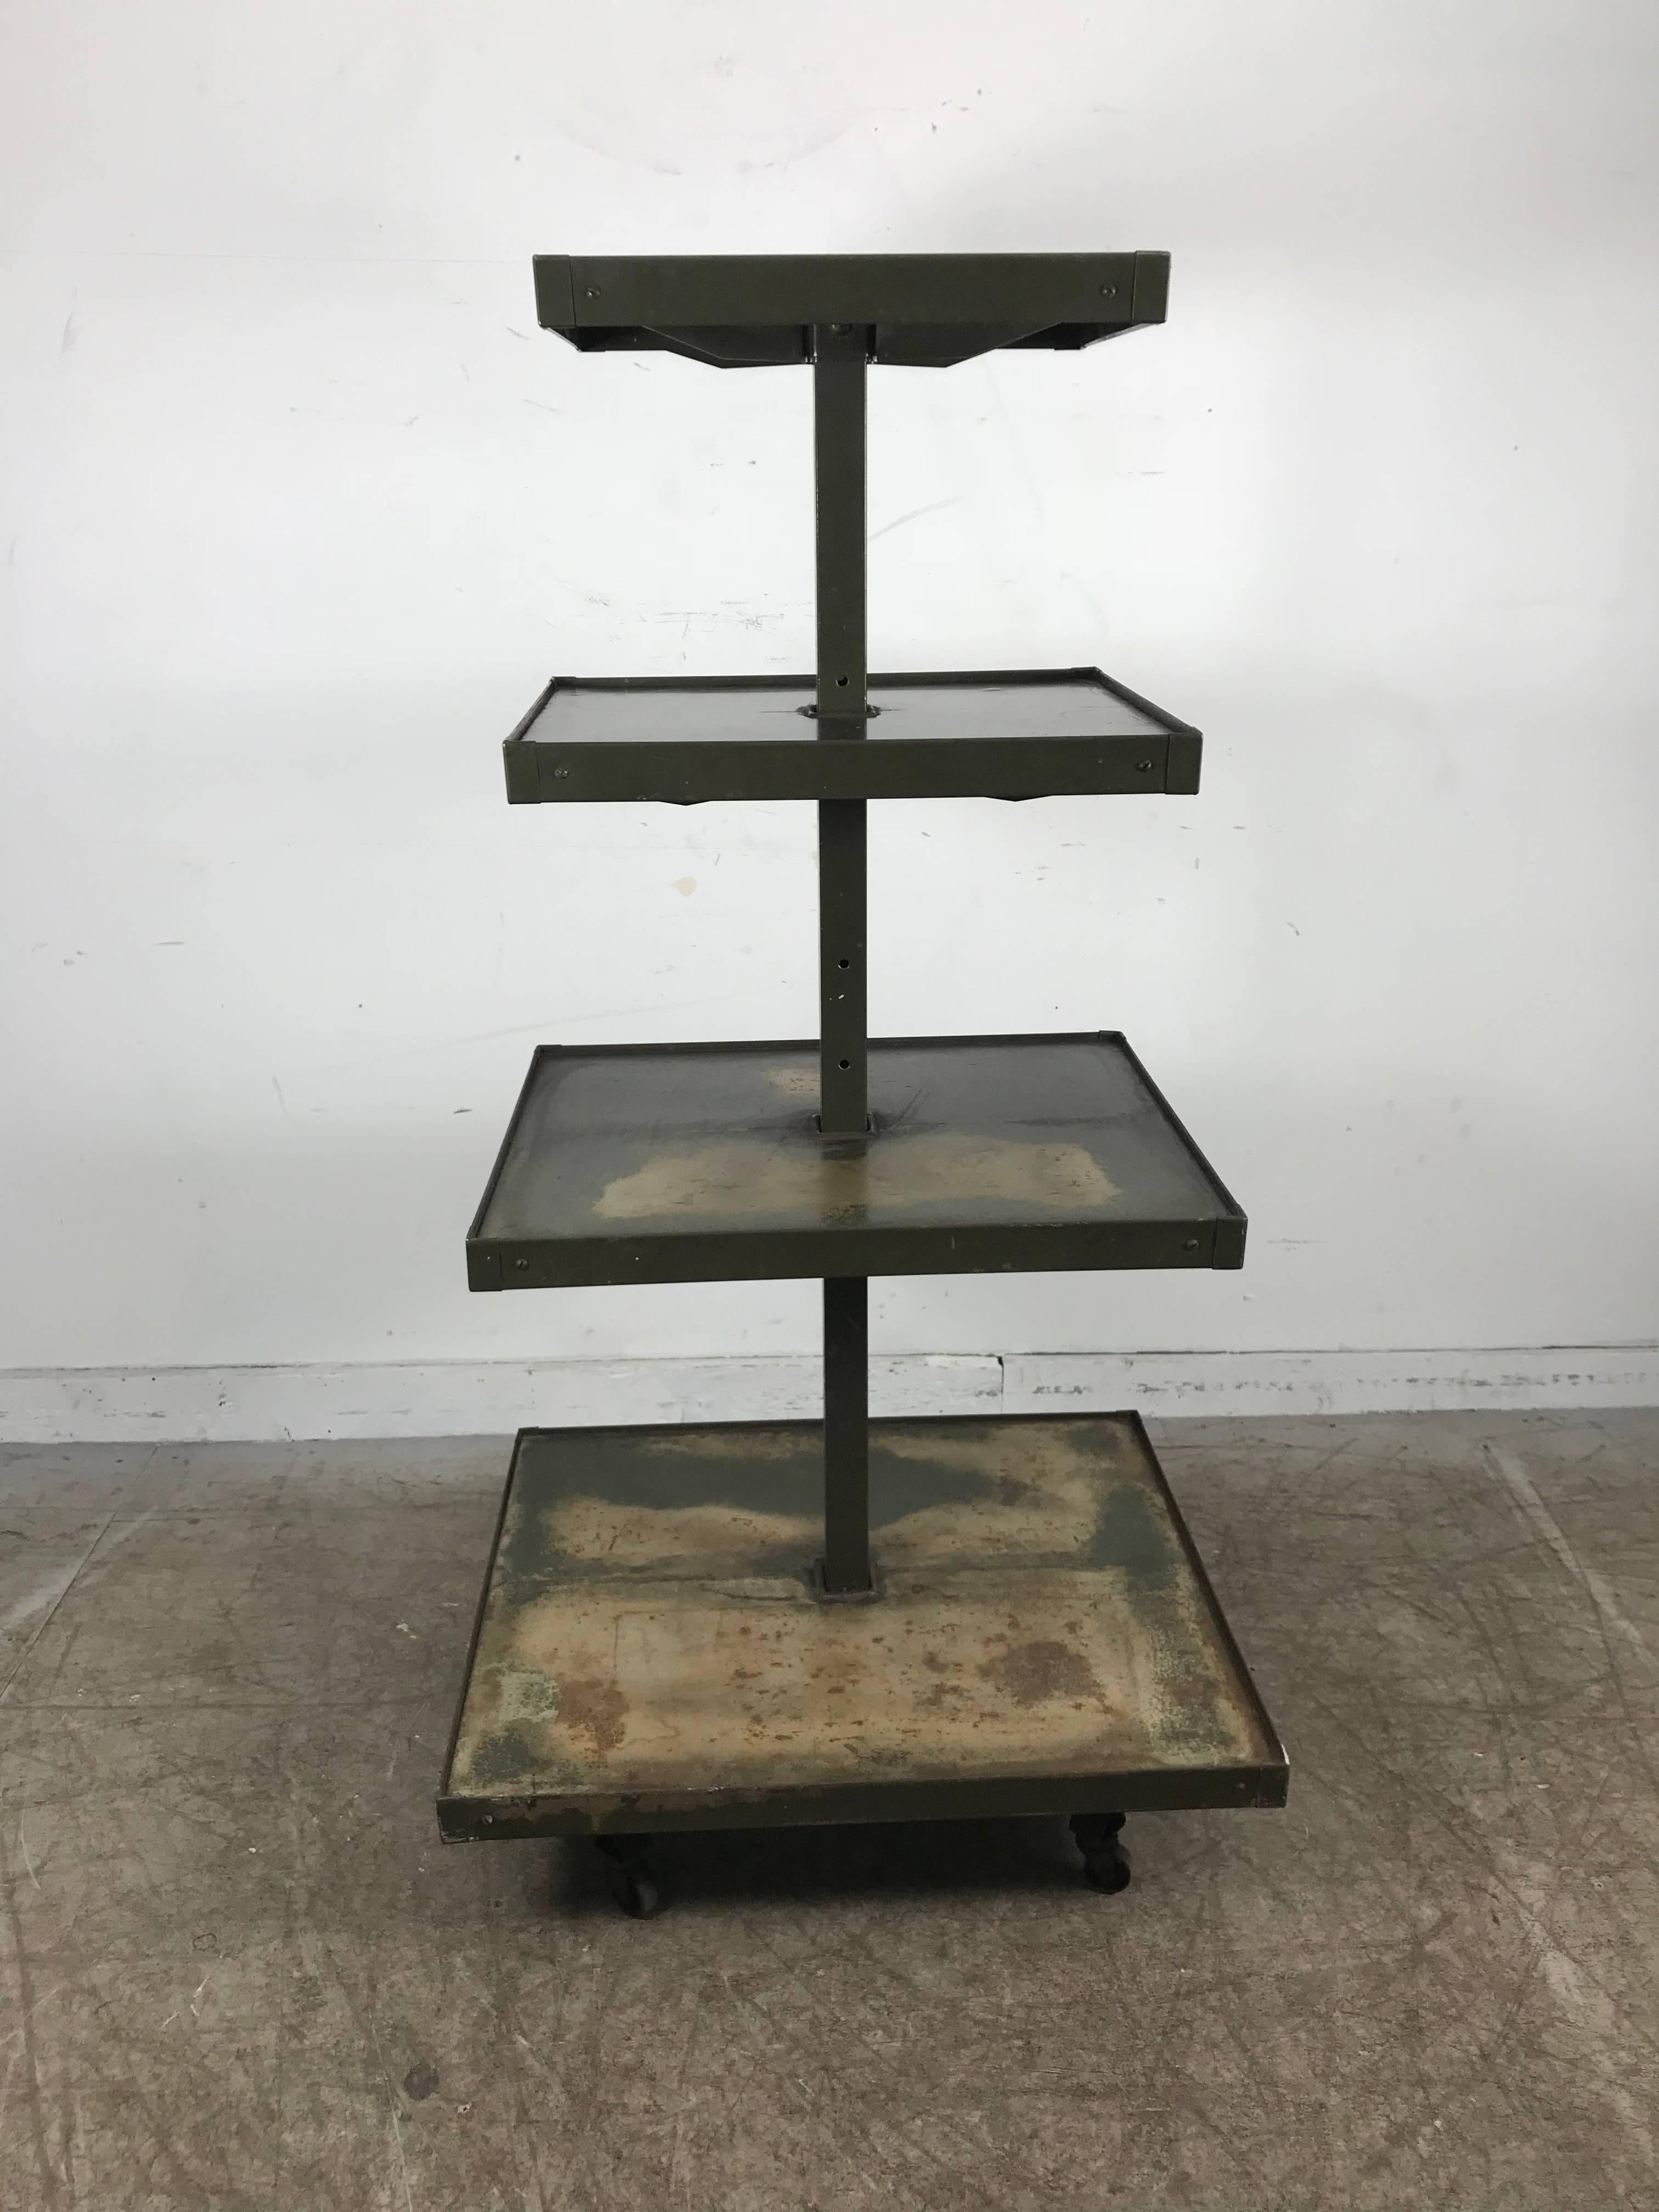 American Industrial 4 tier rolling display stand, distressed finish.Dayton Display Co.